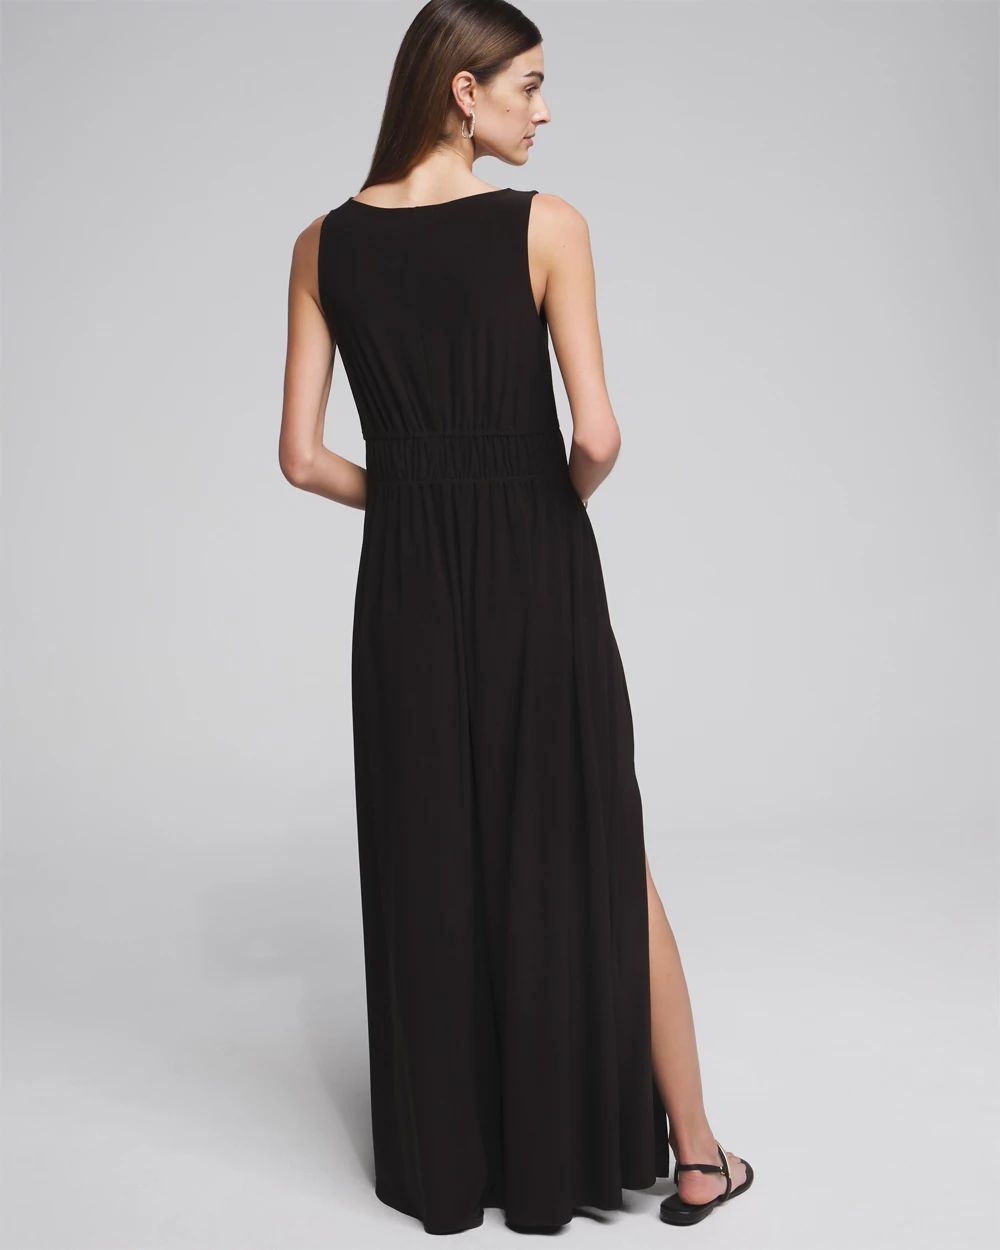 Outlet WHBM Empire Waist Maxi click to view larger image.